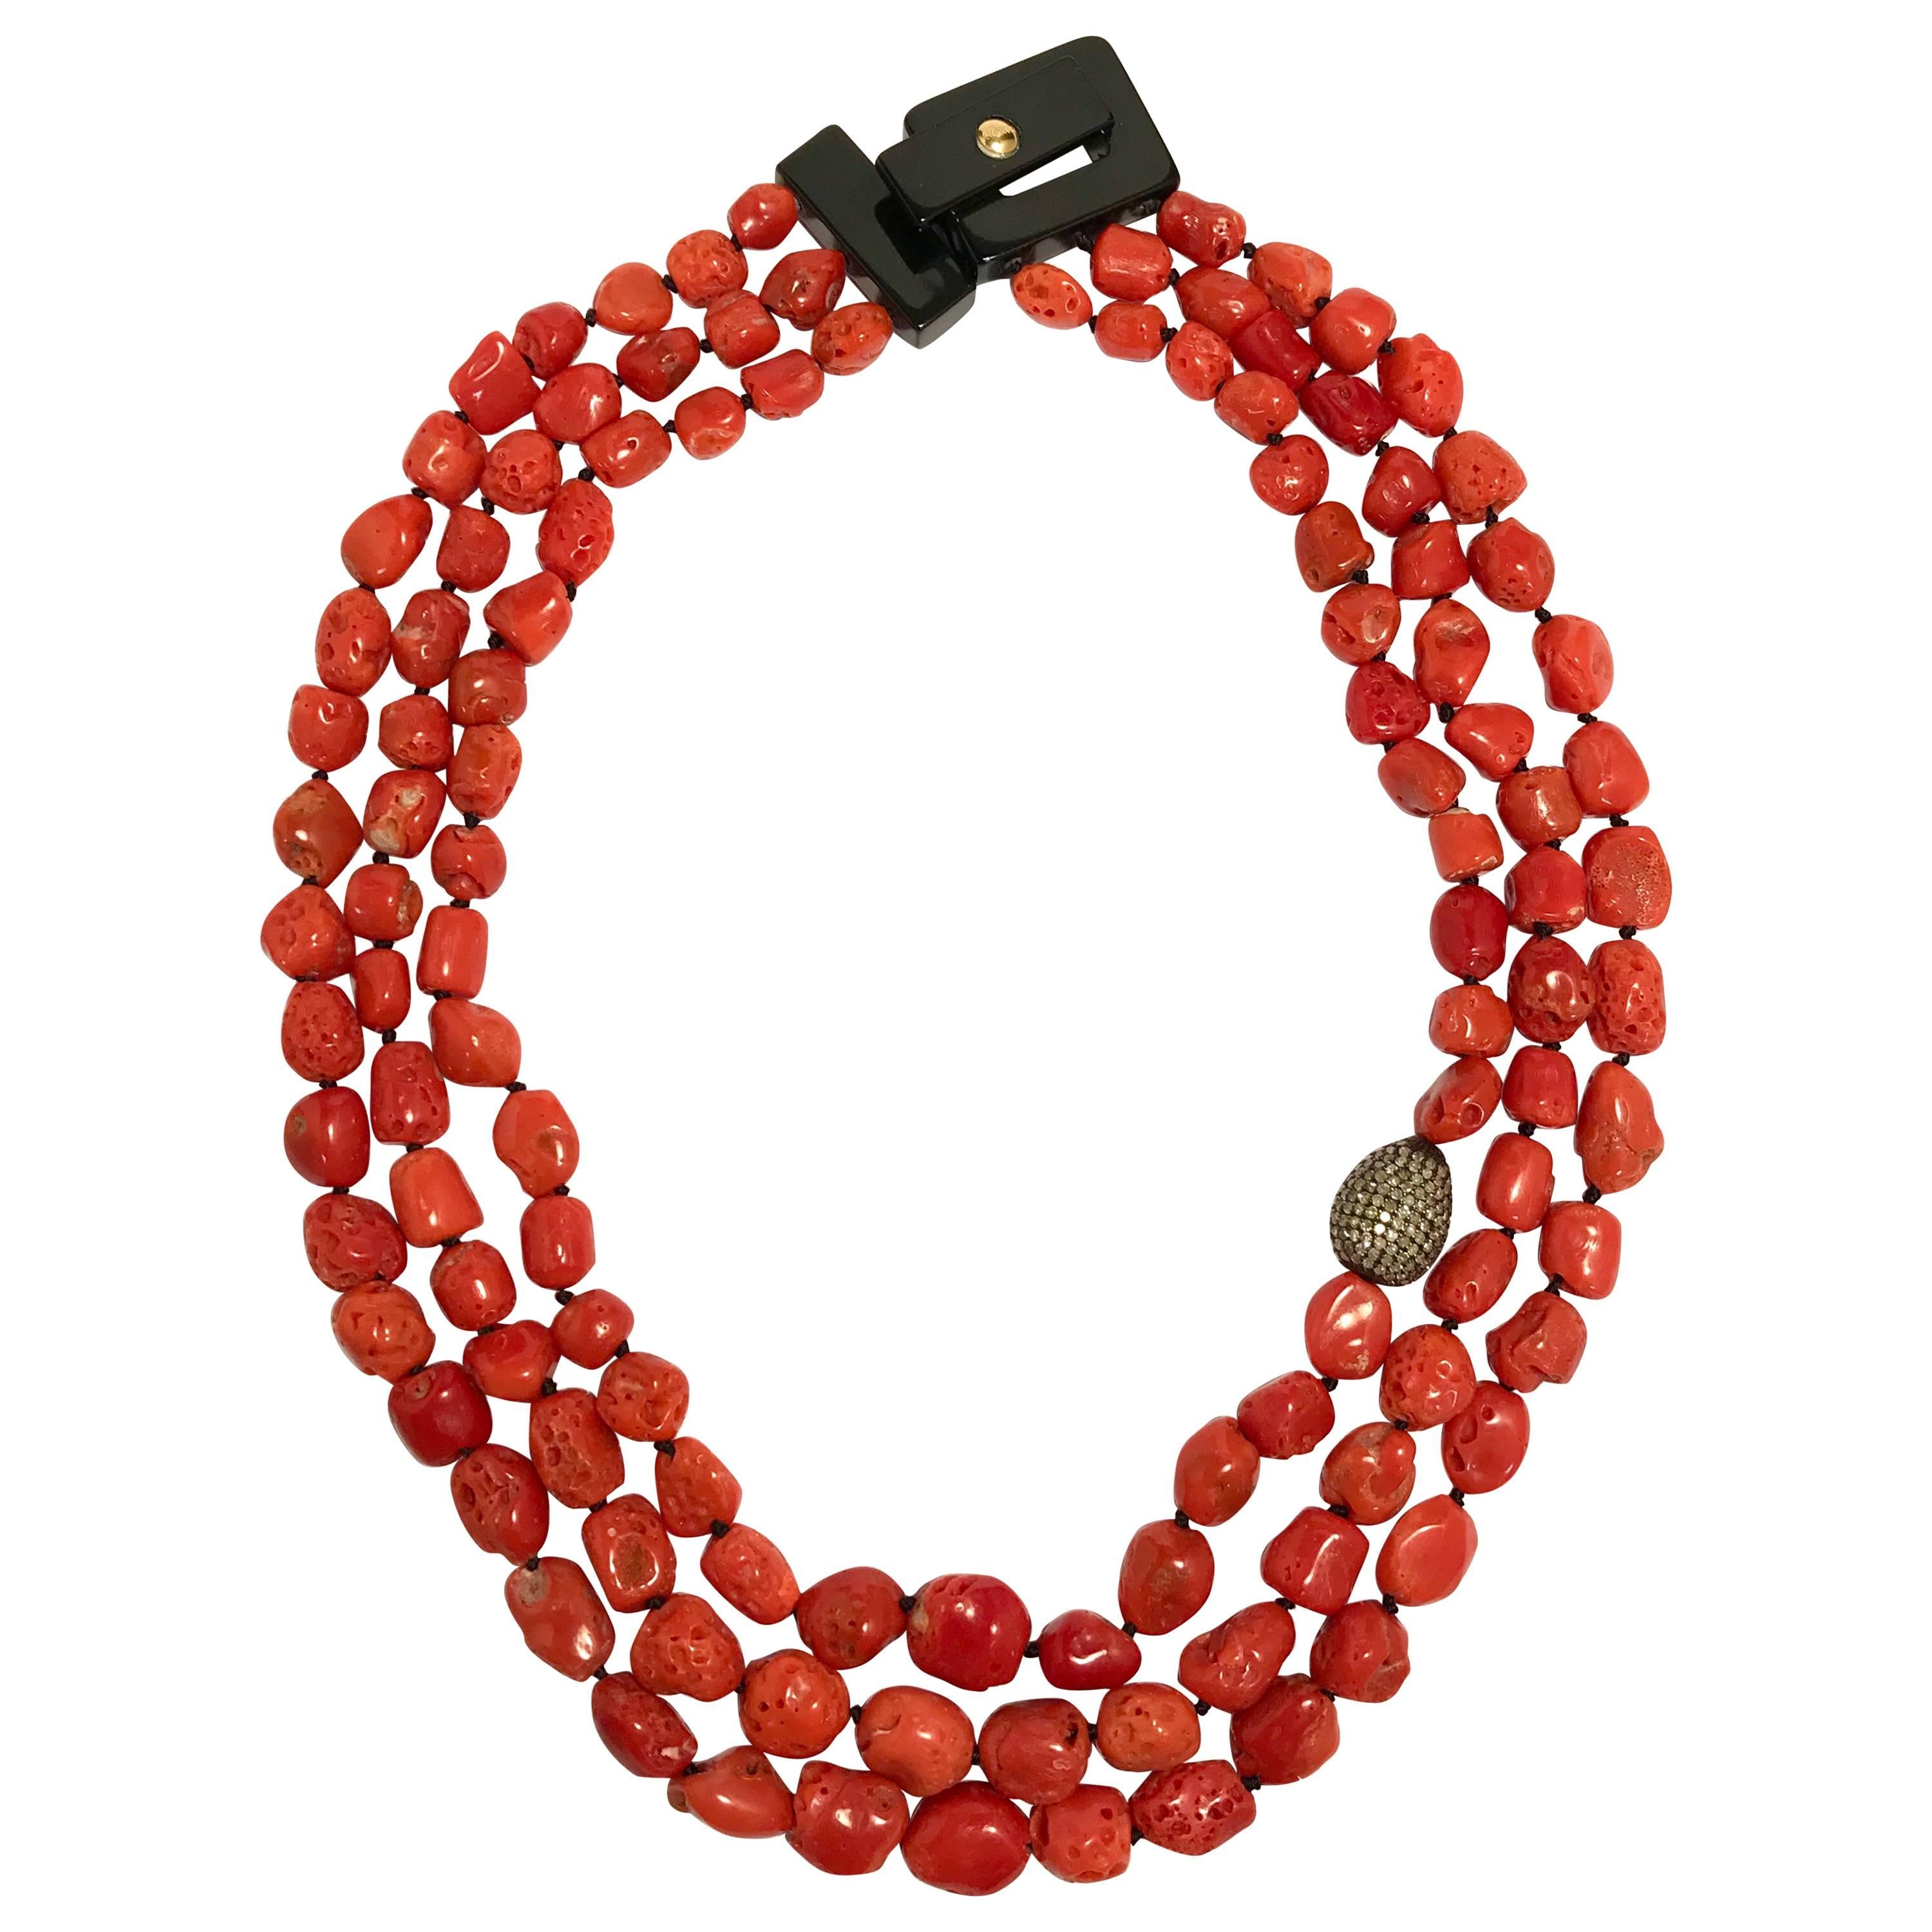 Coral Brown Diamonds and Bakelite Necklace.
Coral
Brown Diamonds
Bakelite
Length 50 cm 